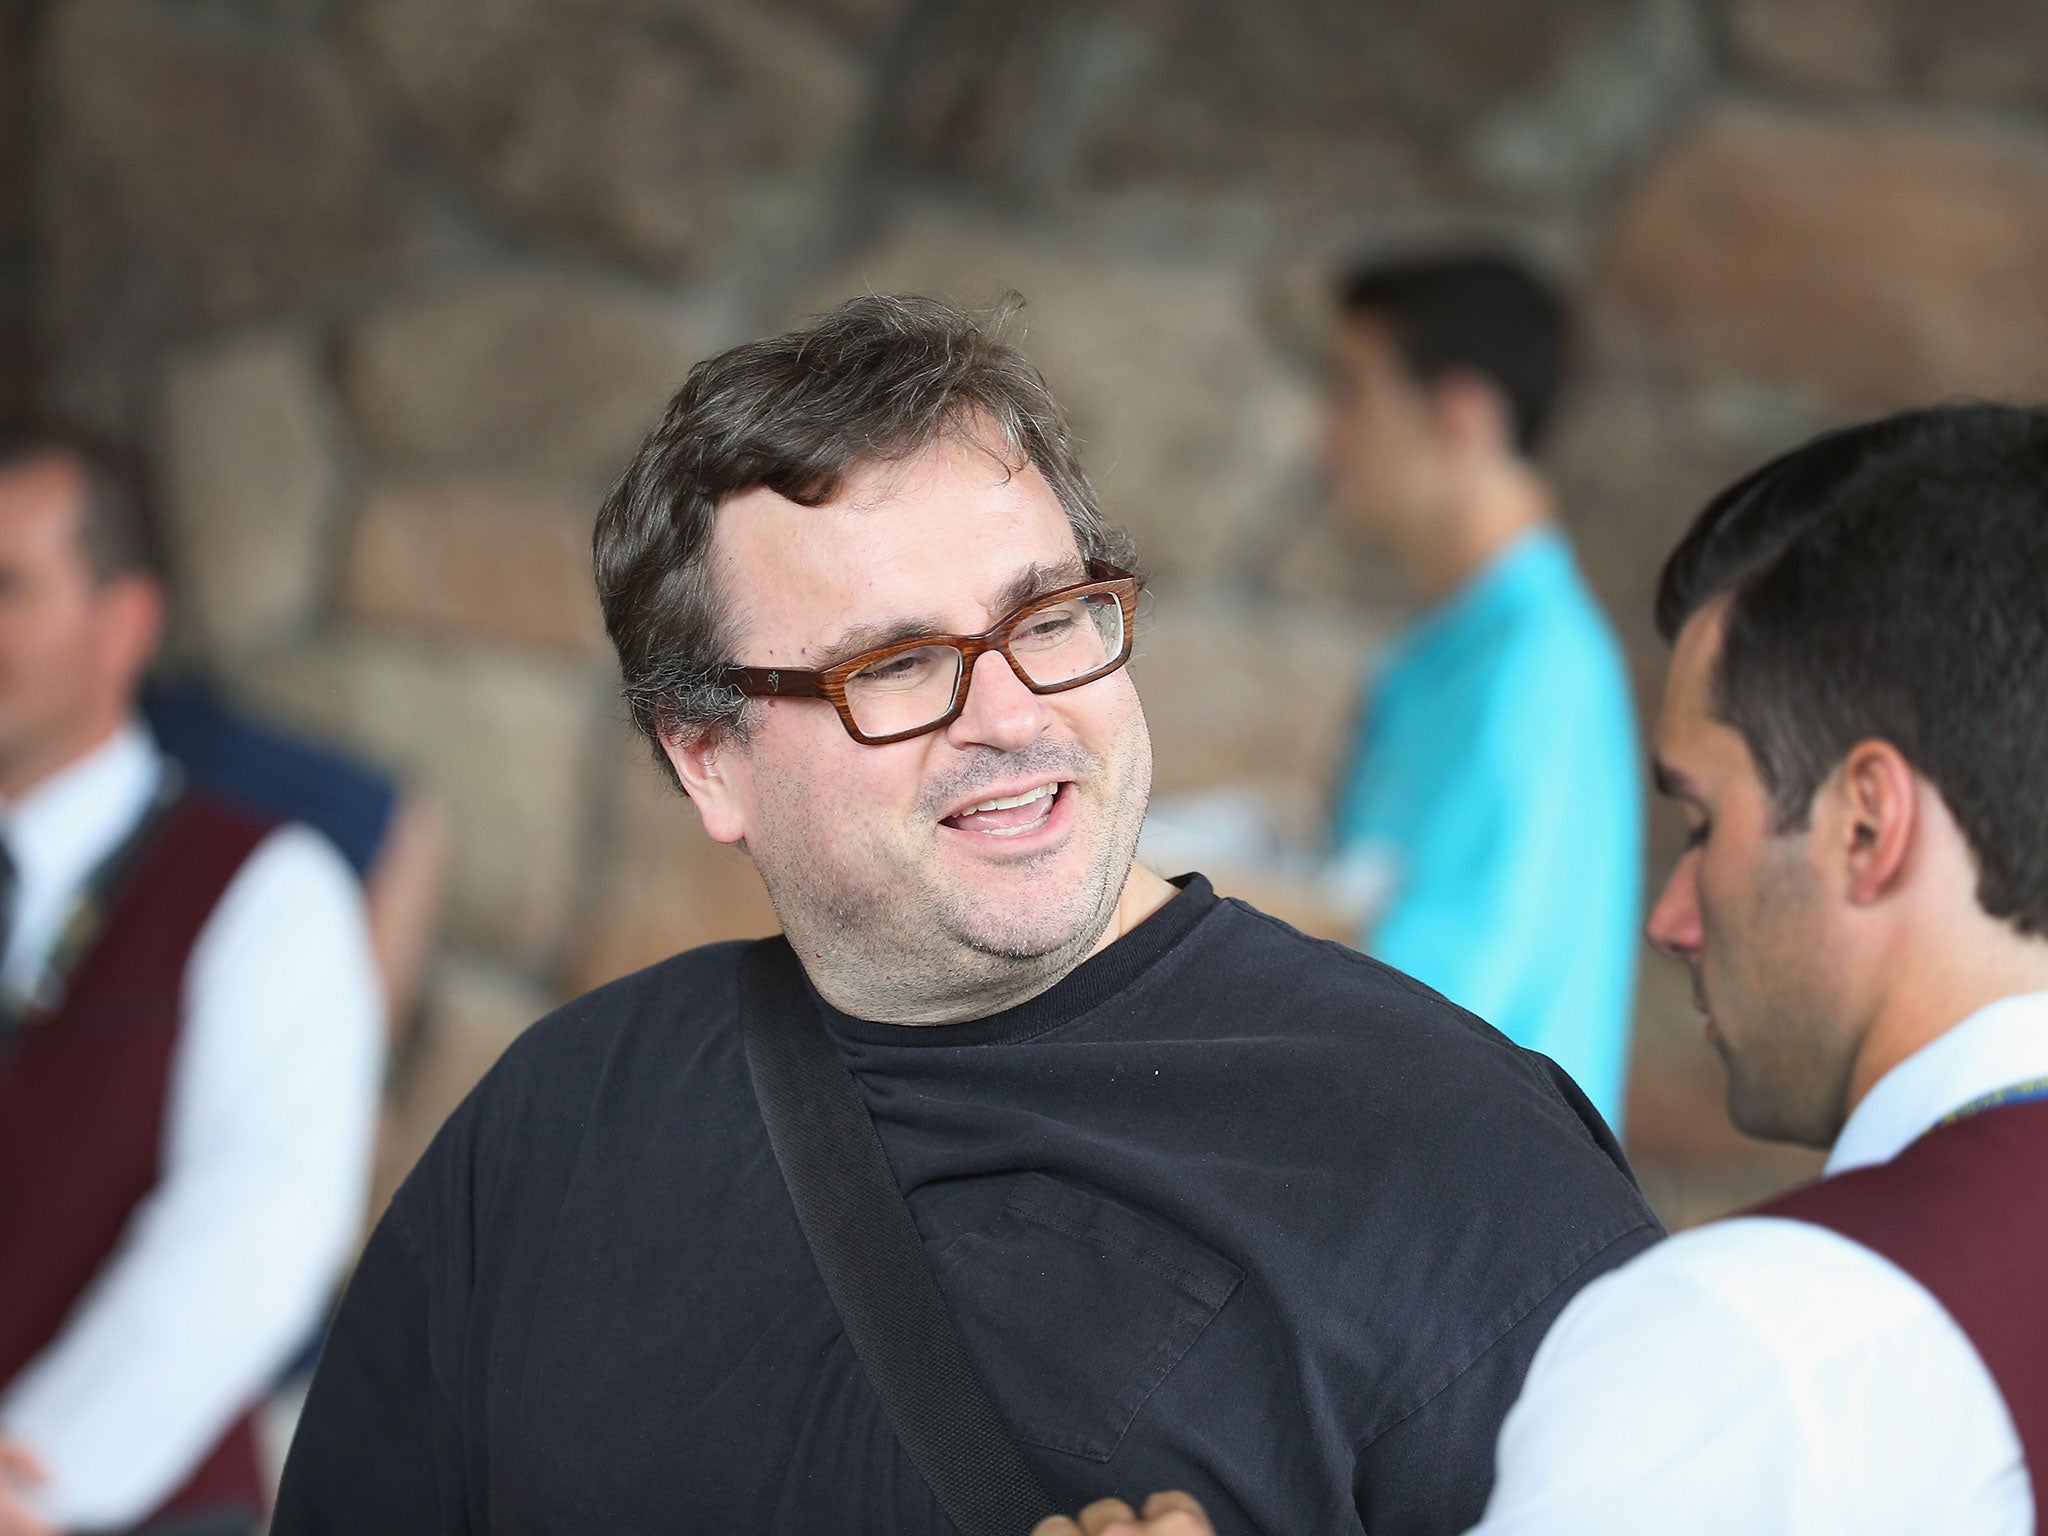 Reid Hoffman has invested in Entrepreneur First, a London-based hub for startups, alongside Mosaic Ventures and Founders Fund